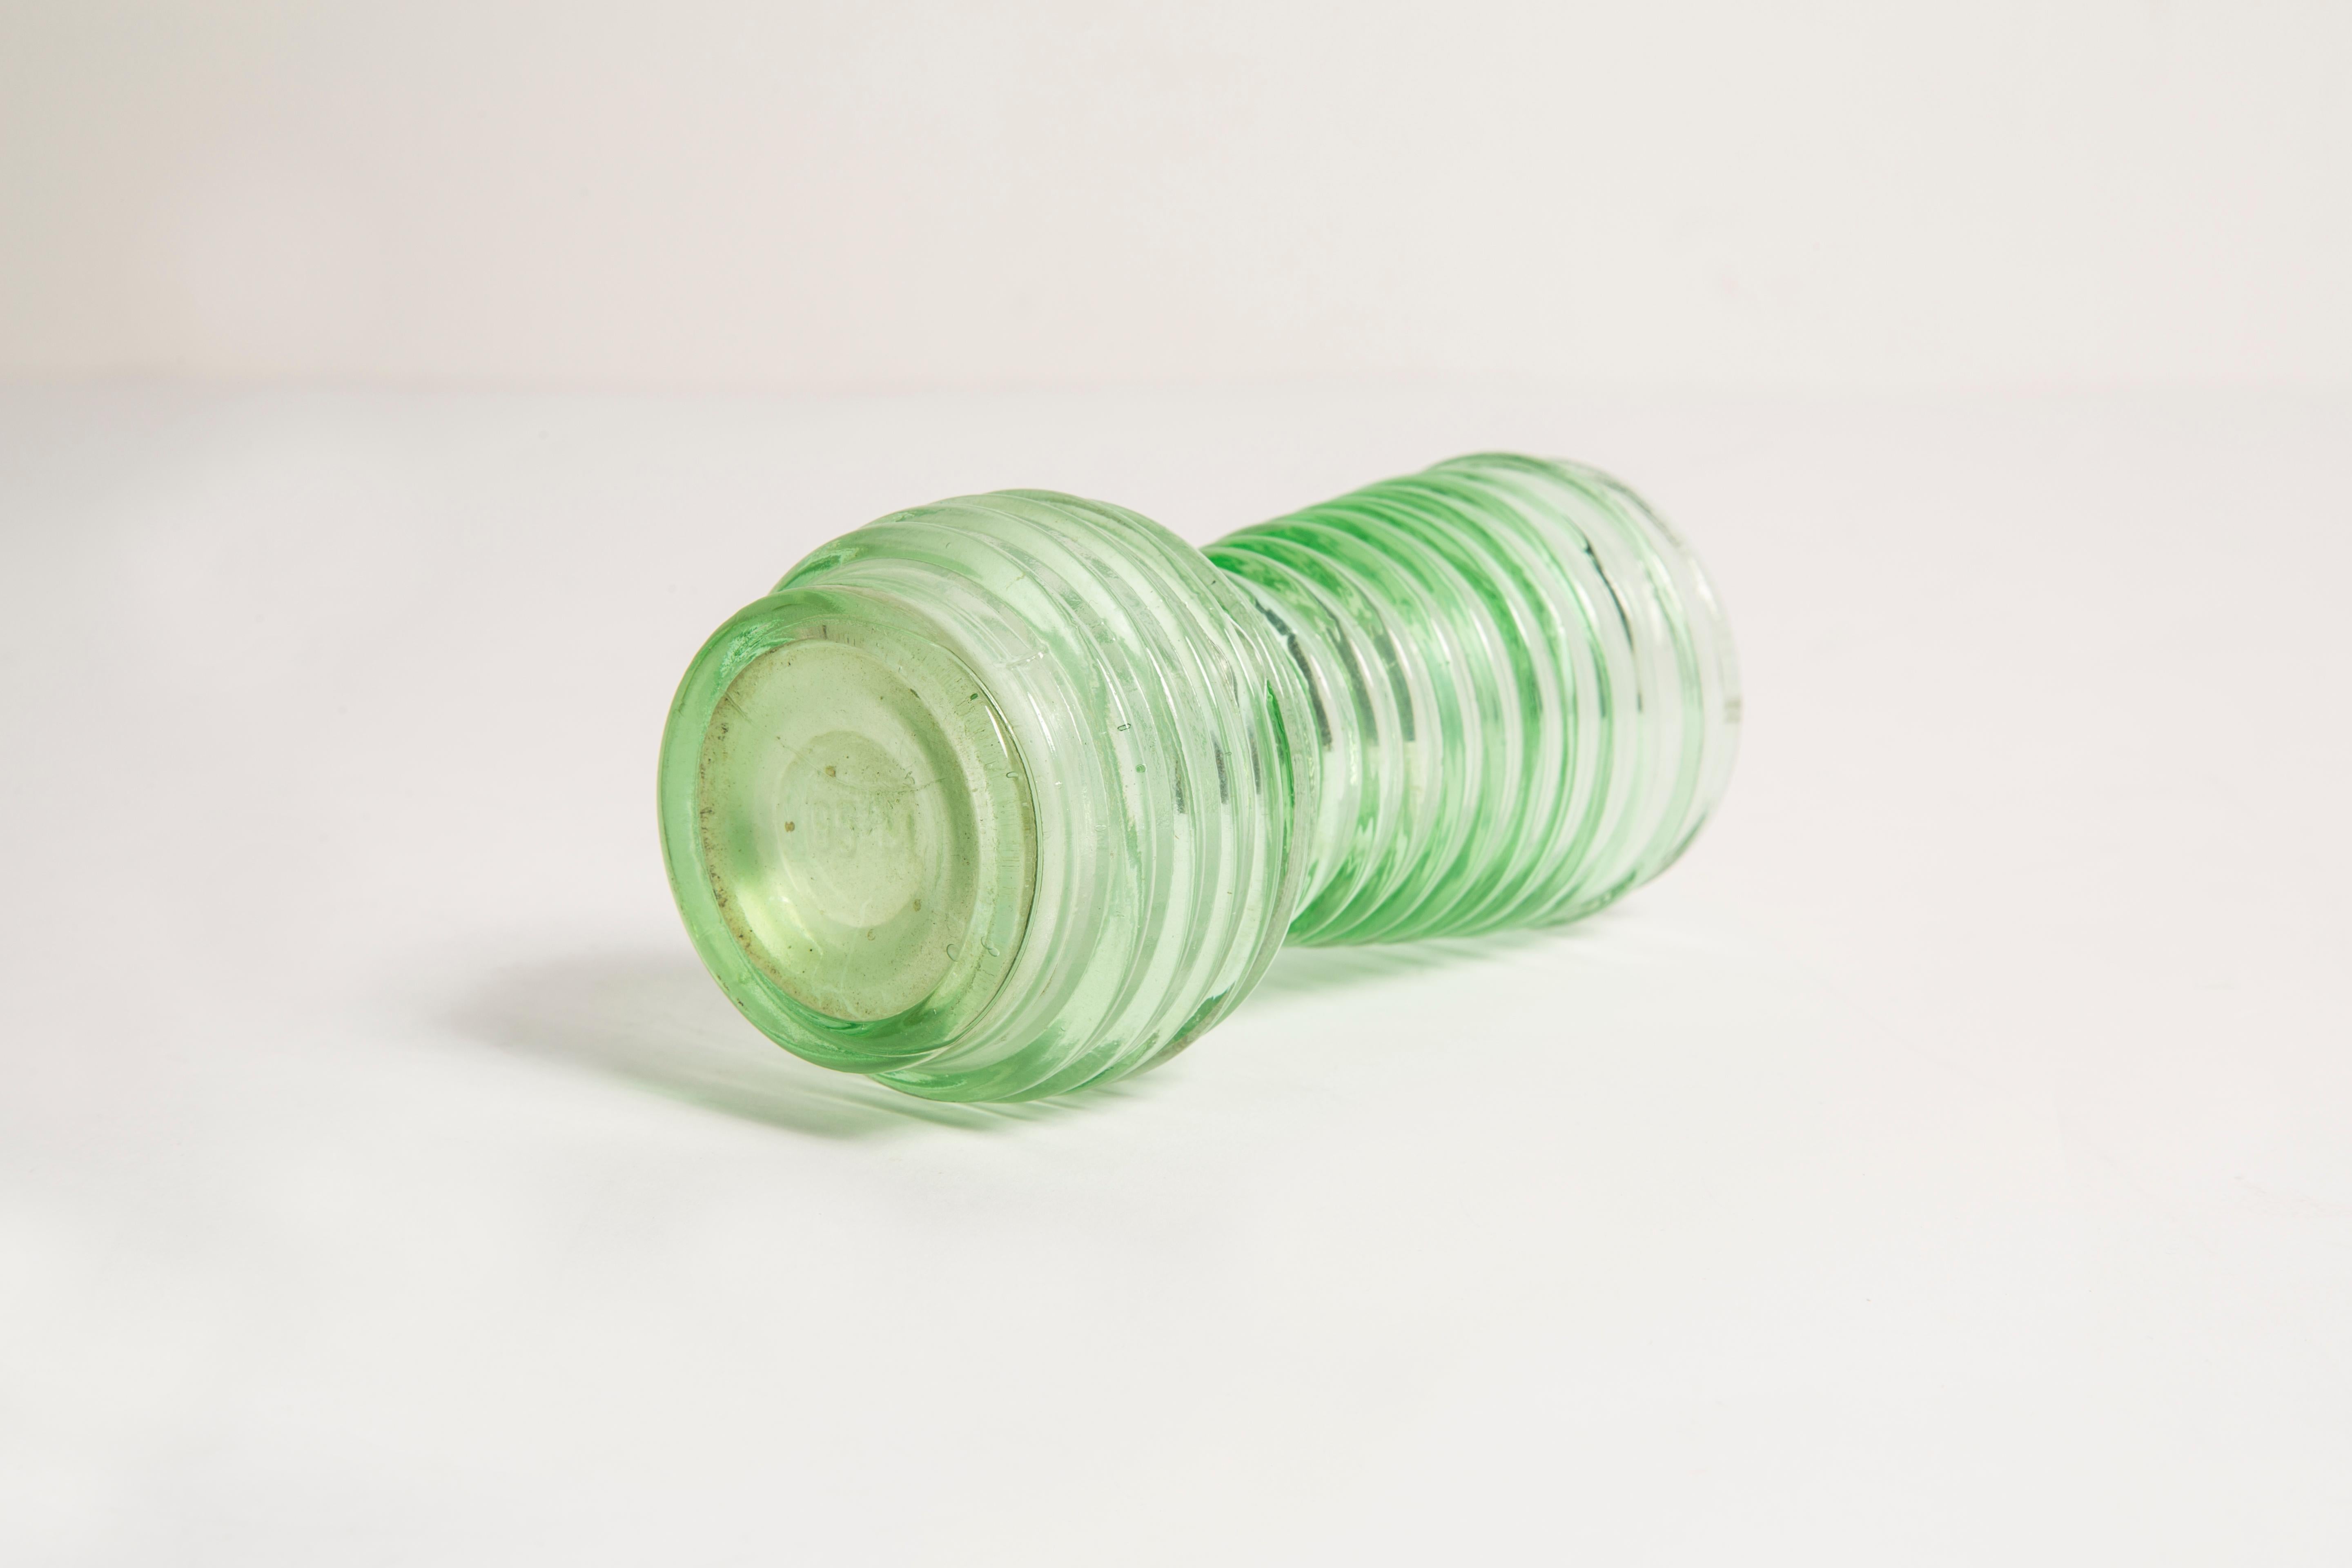 Midcentury Vintage Green Small Geometric Vase, Europe, 1960s For Sale 1